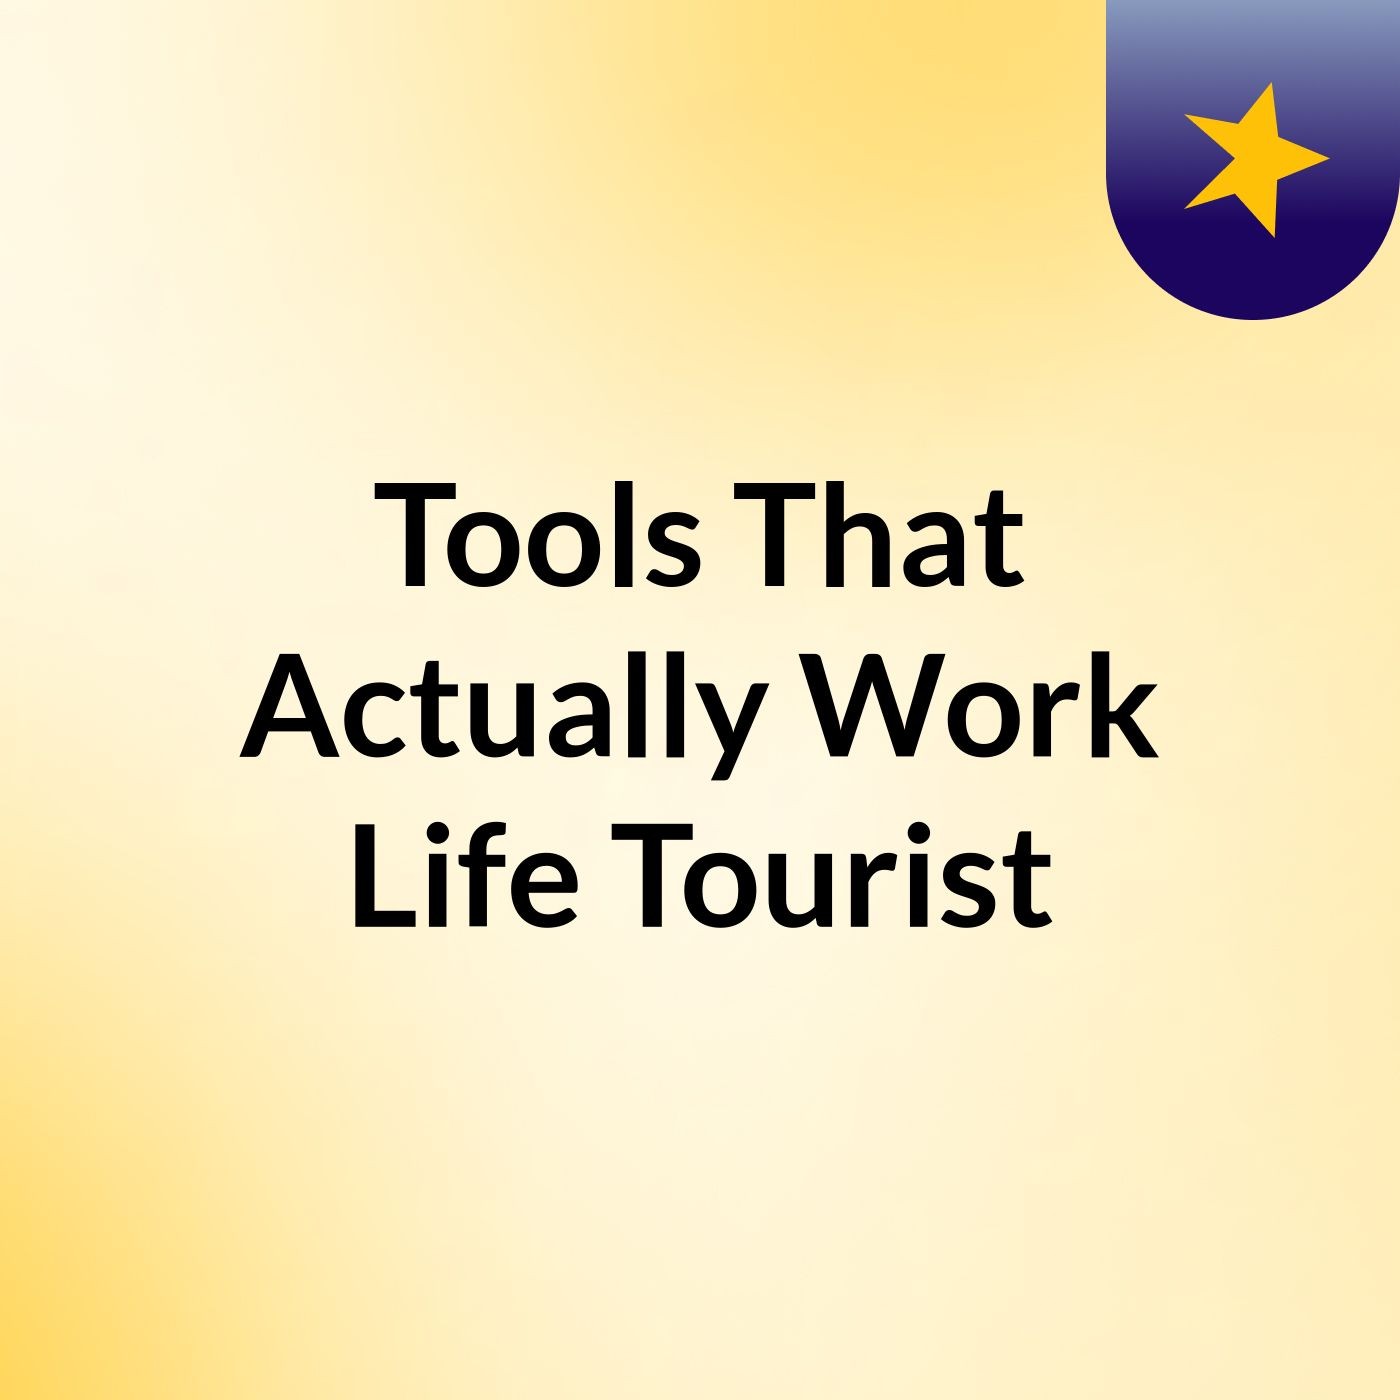 Tools That Actually Work 💕 Life Tourist